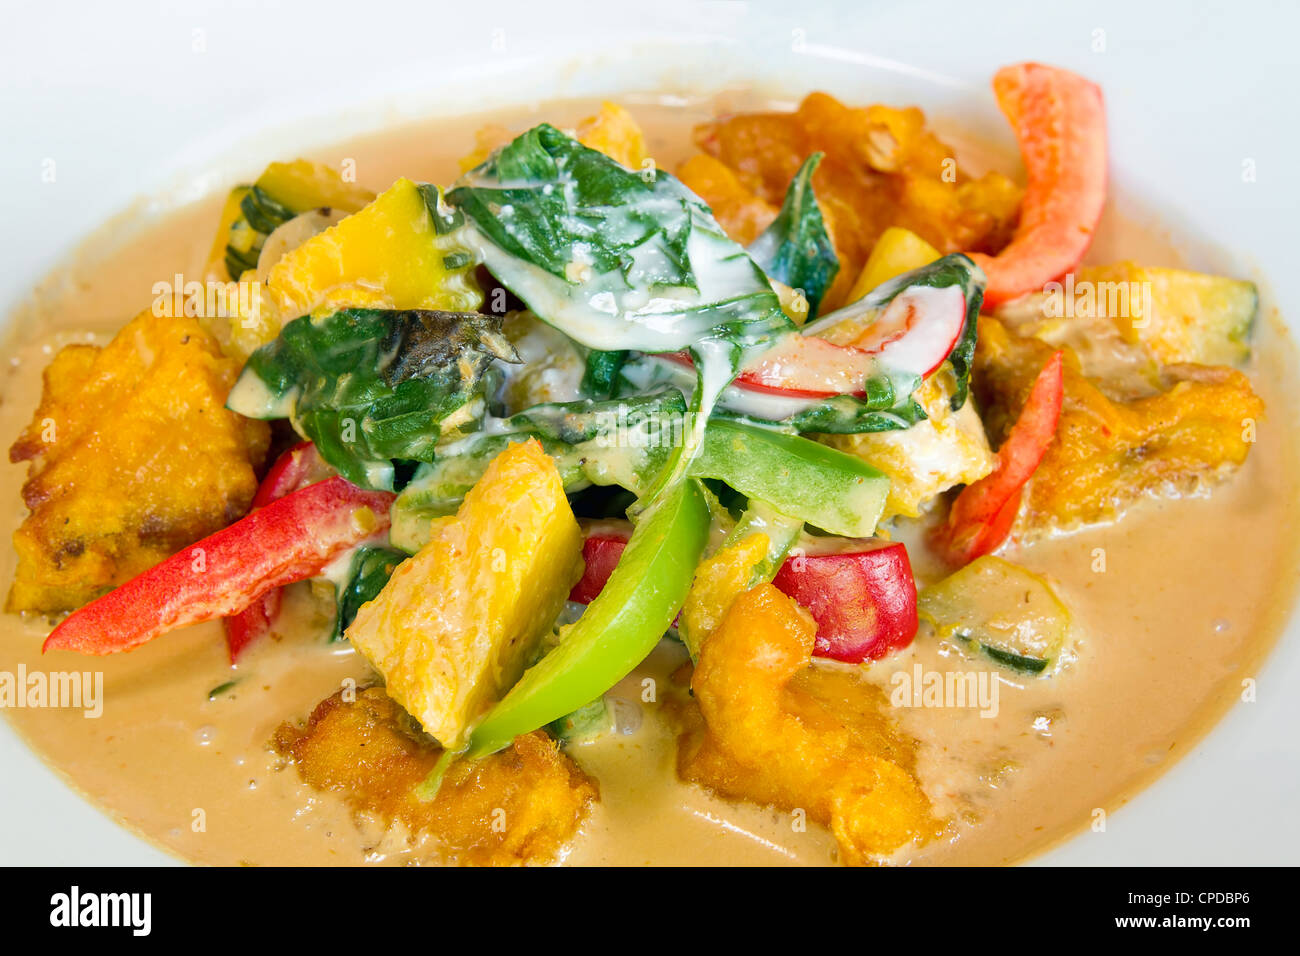 Thai Friend Salmon Fish Fillet in Red Curry with Basil Leaves Pumpkin and Bell Peppers Closeup Stock Photo